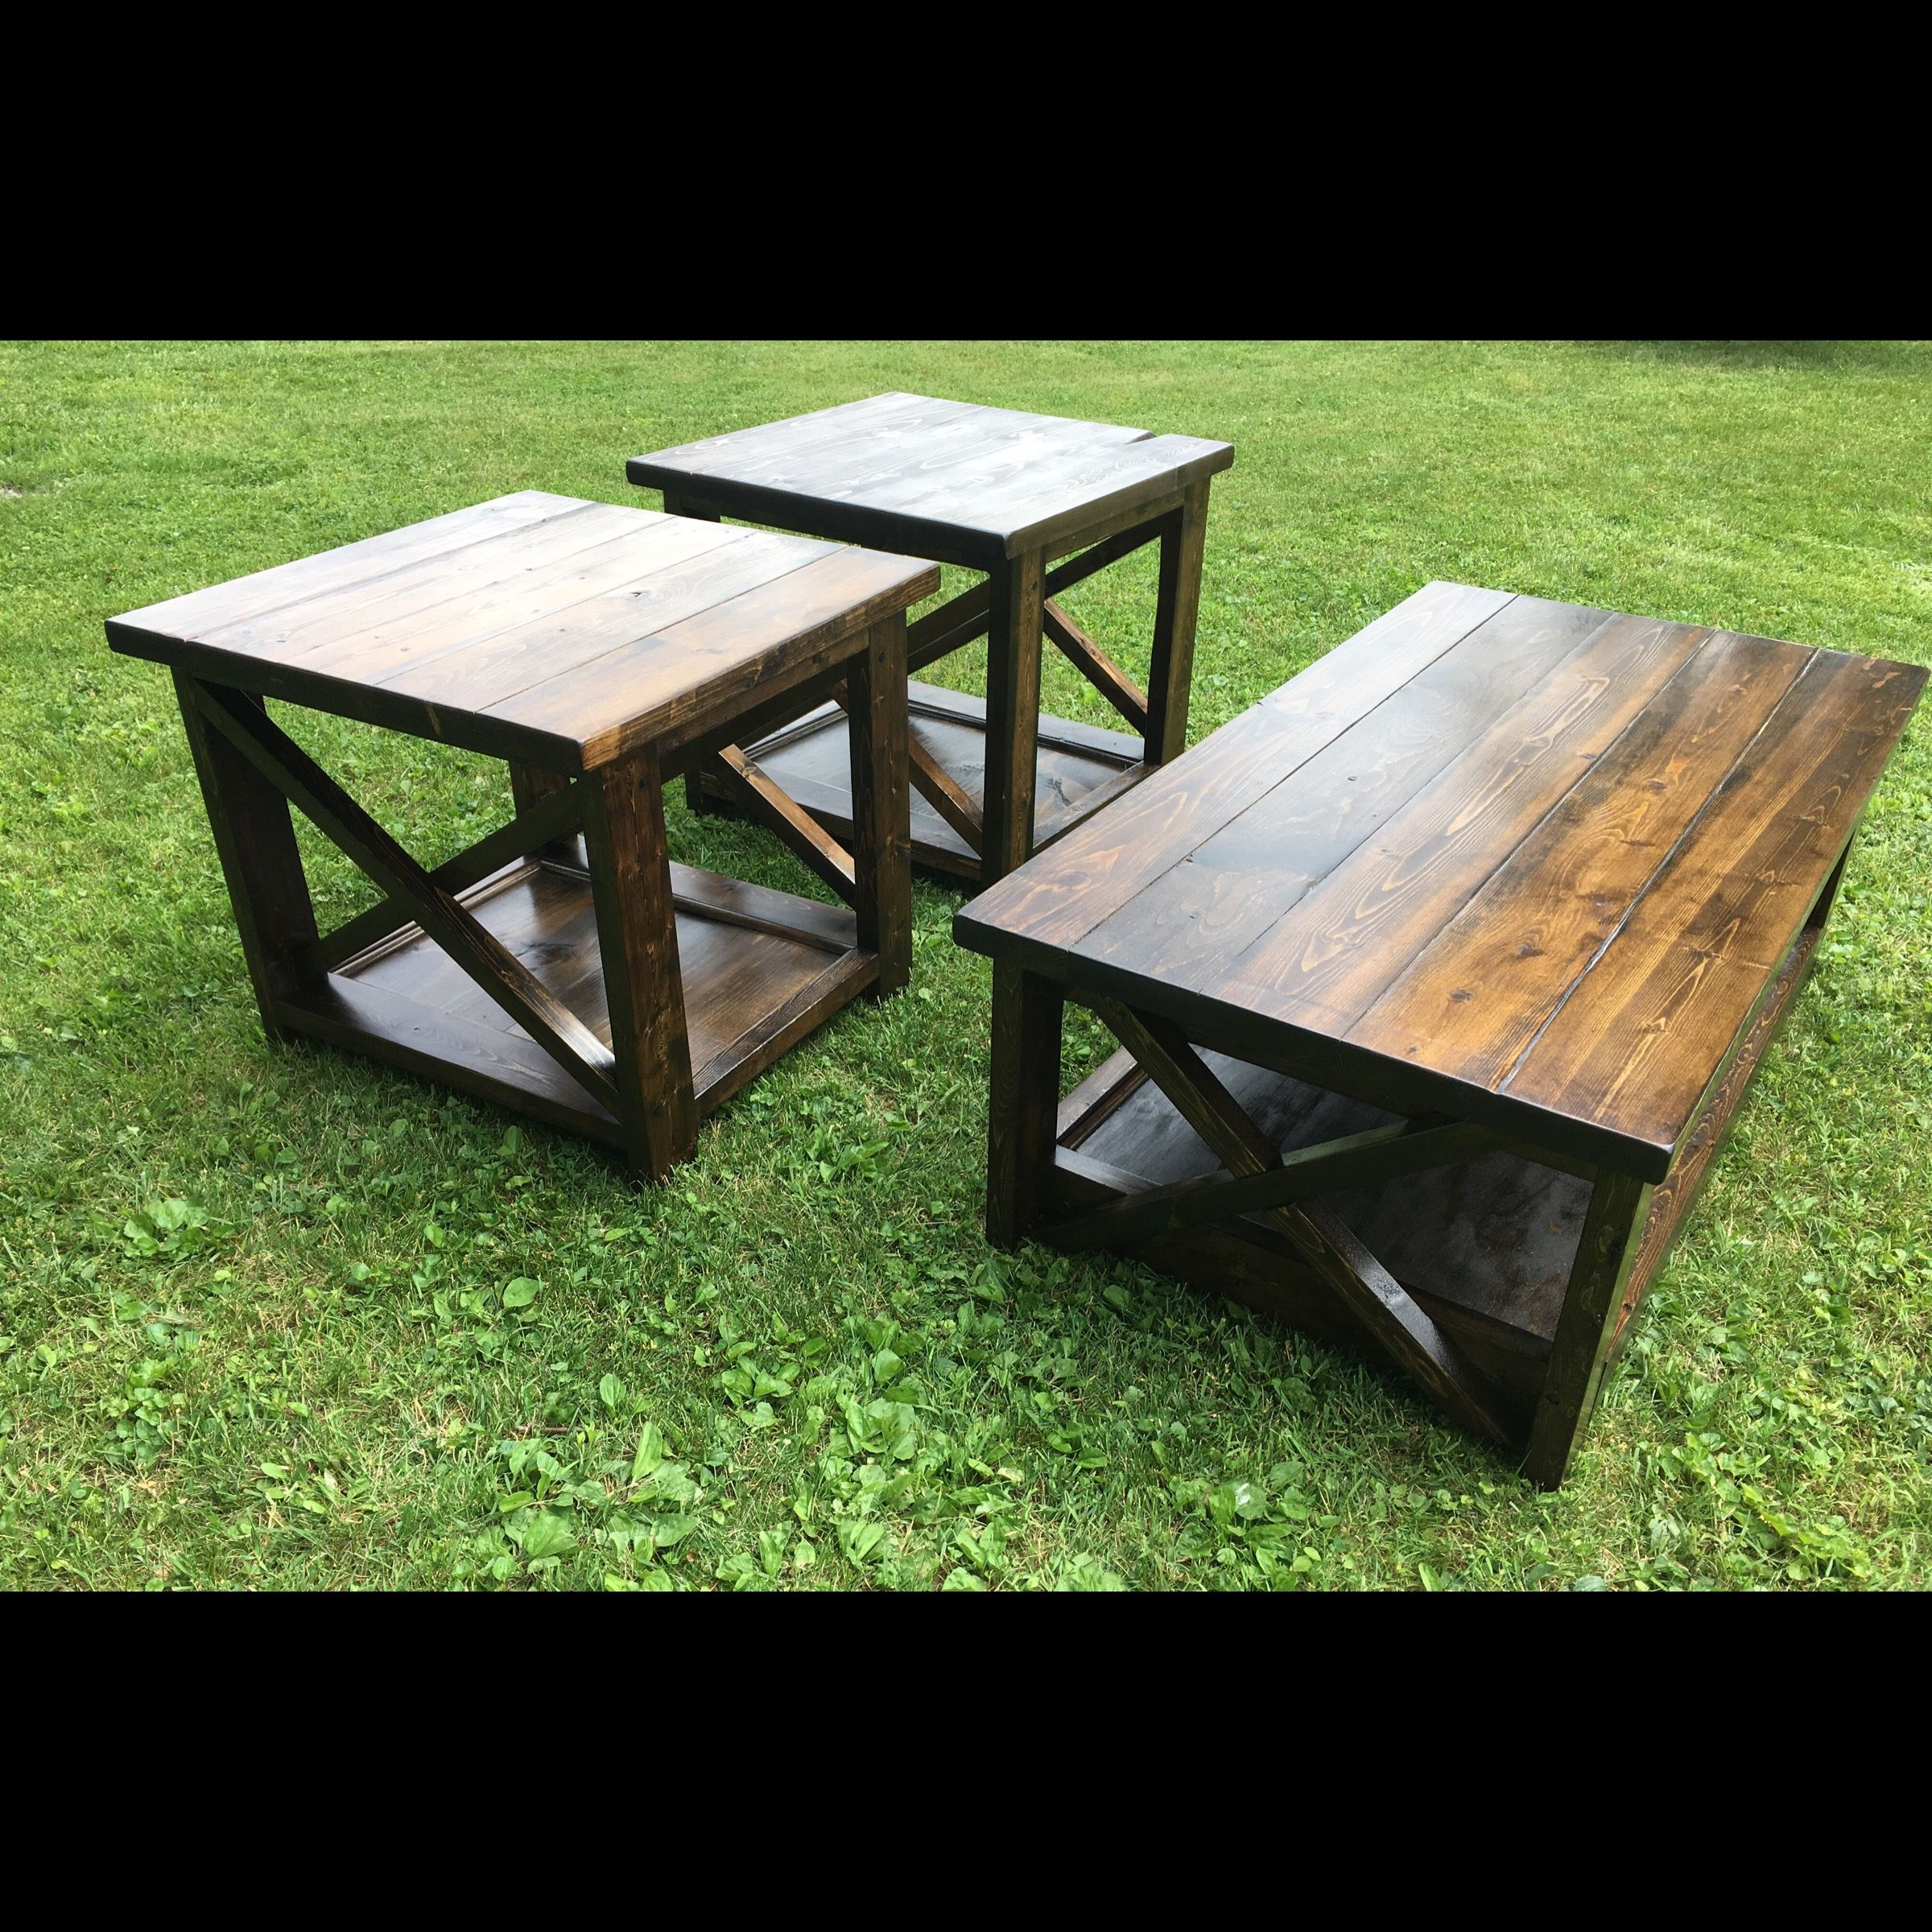 Rustic X Coffee Table With Matching End Tables My Backyard Diy in size 2400 X 2400